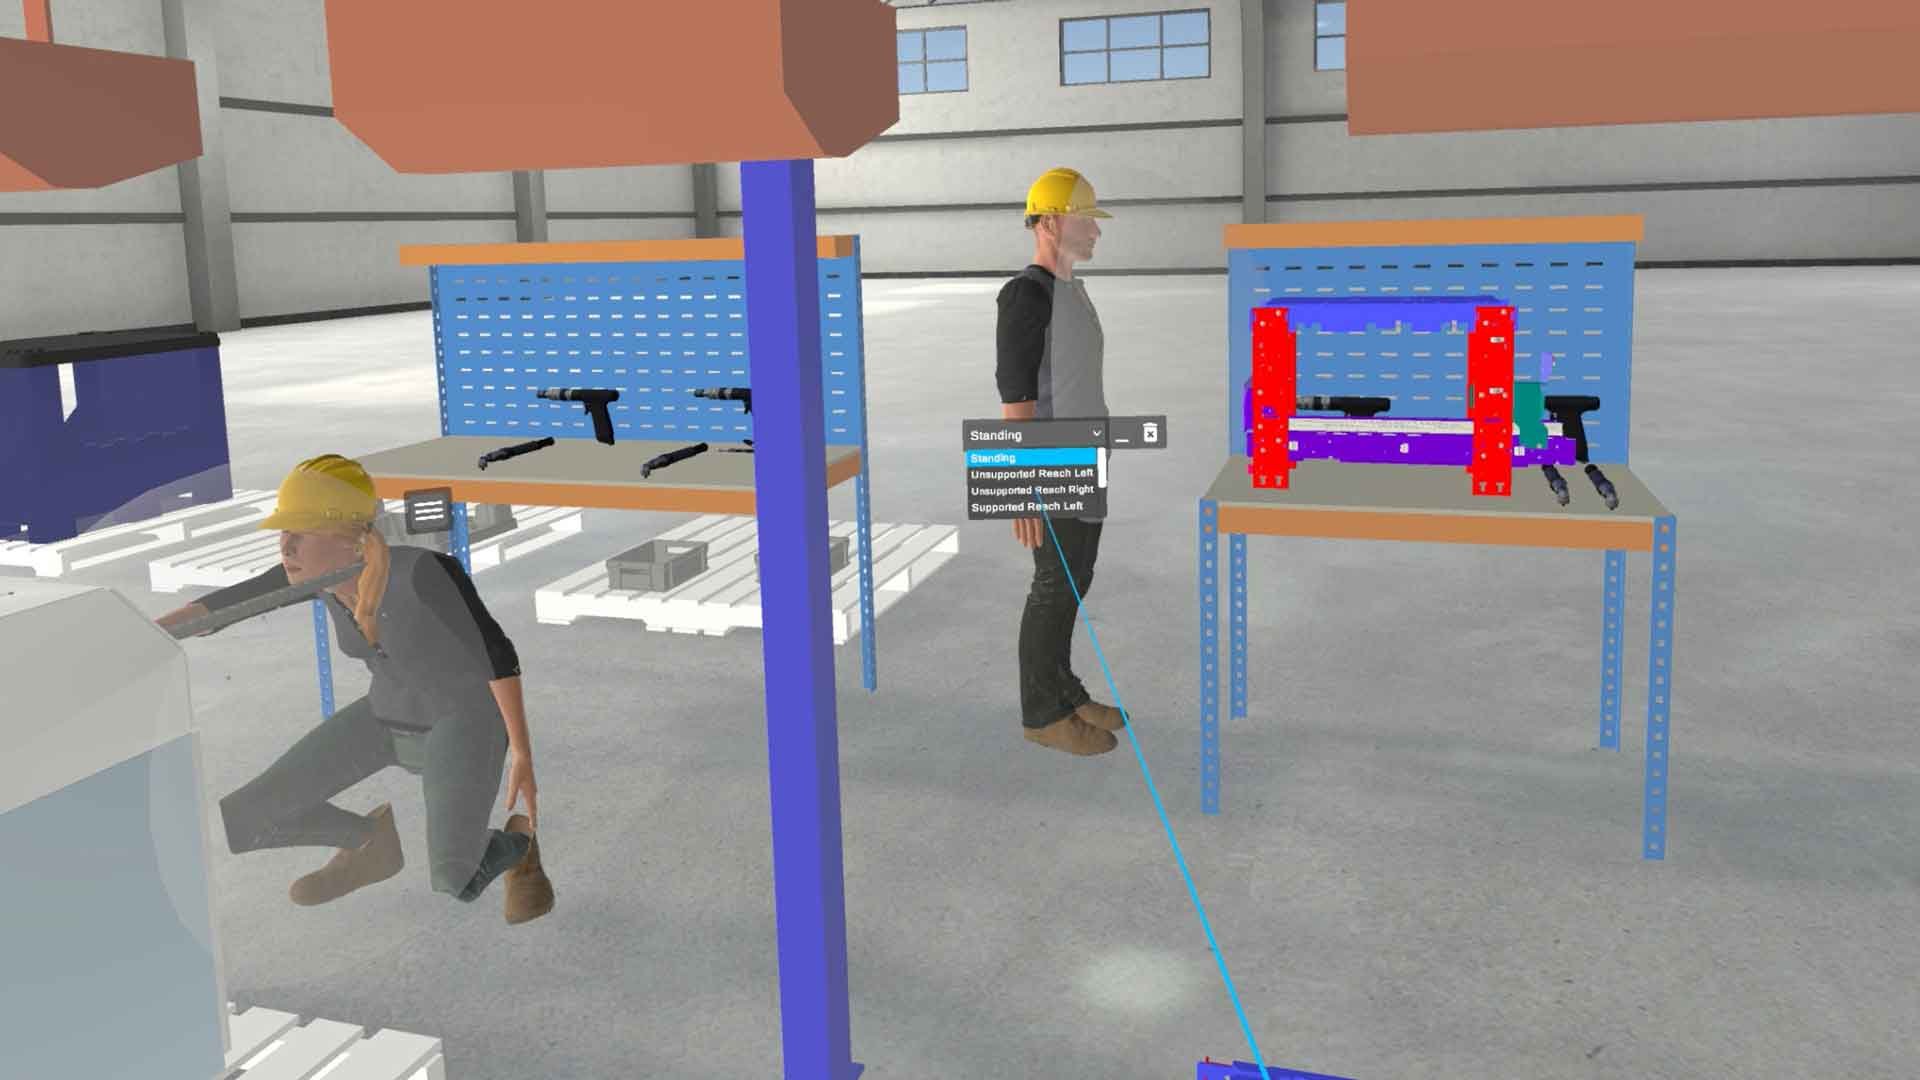 Virtual Reality for design engineering and manufacturing